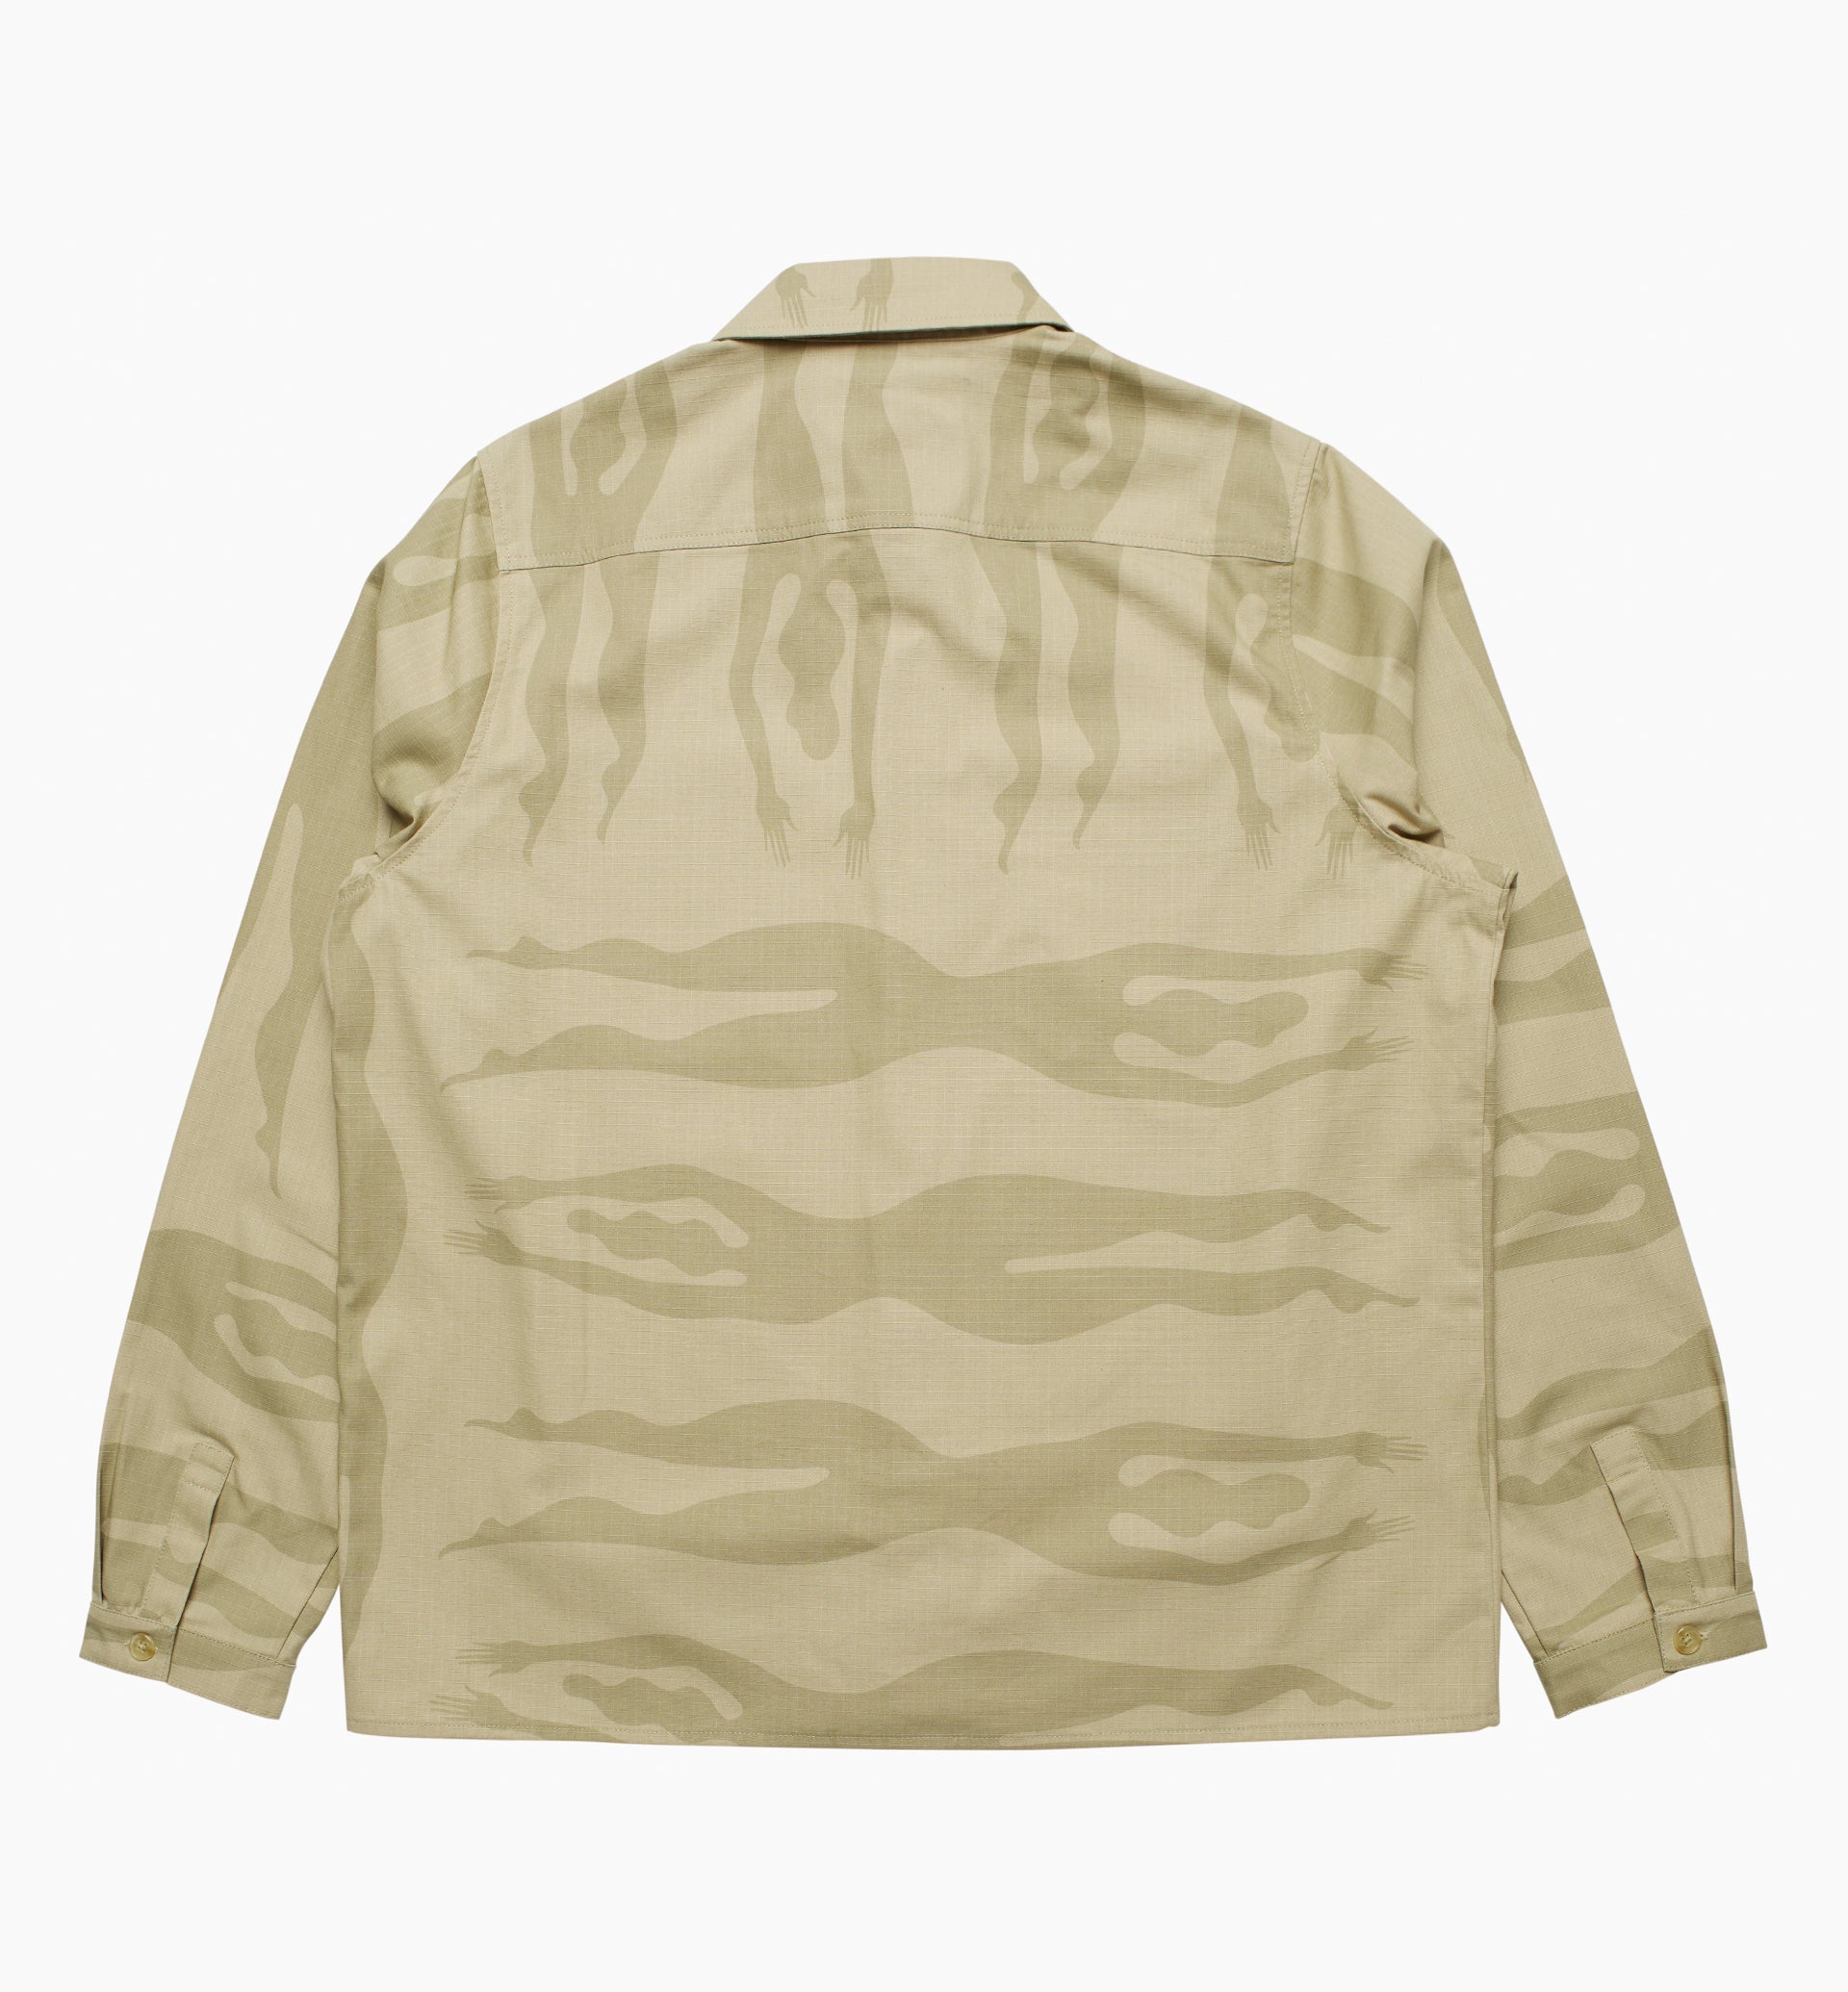 Parra - under polluted water shirt